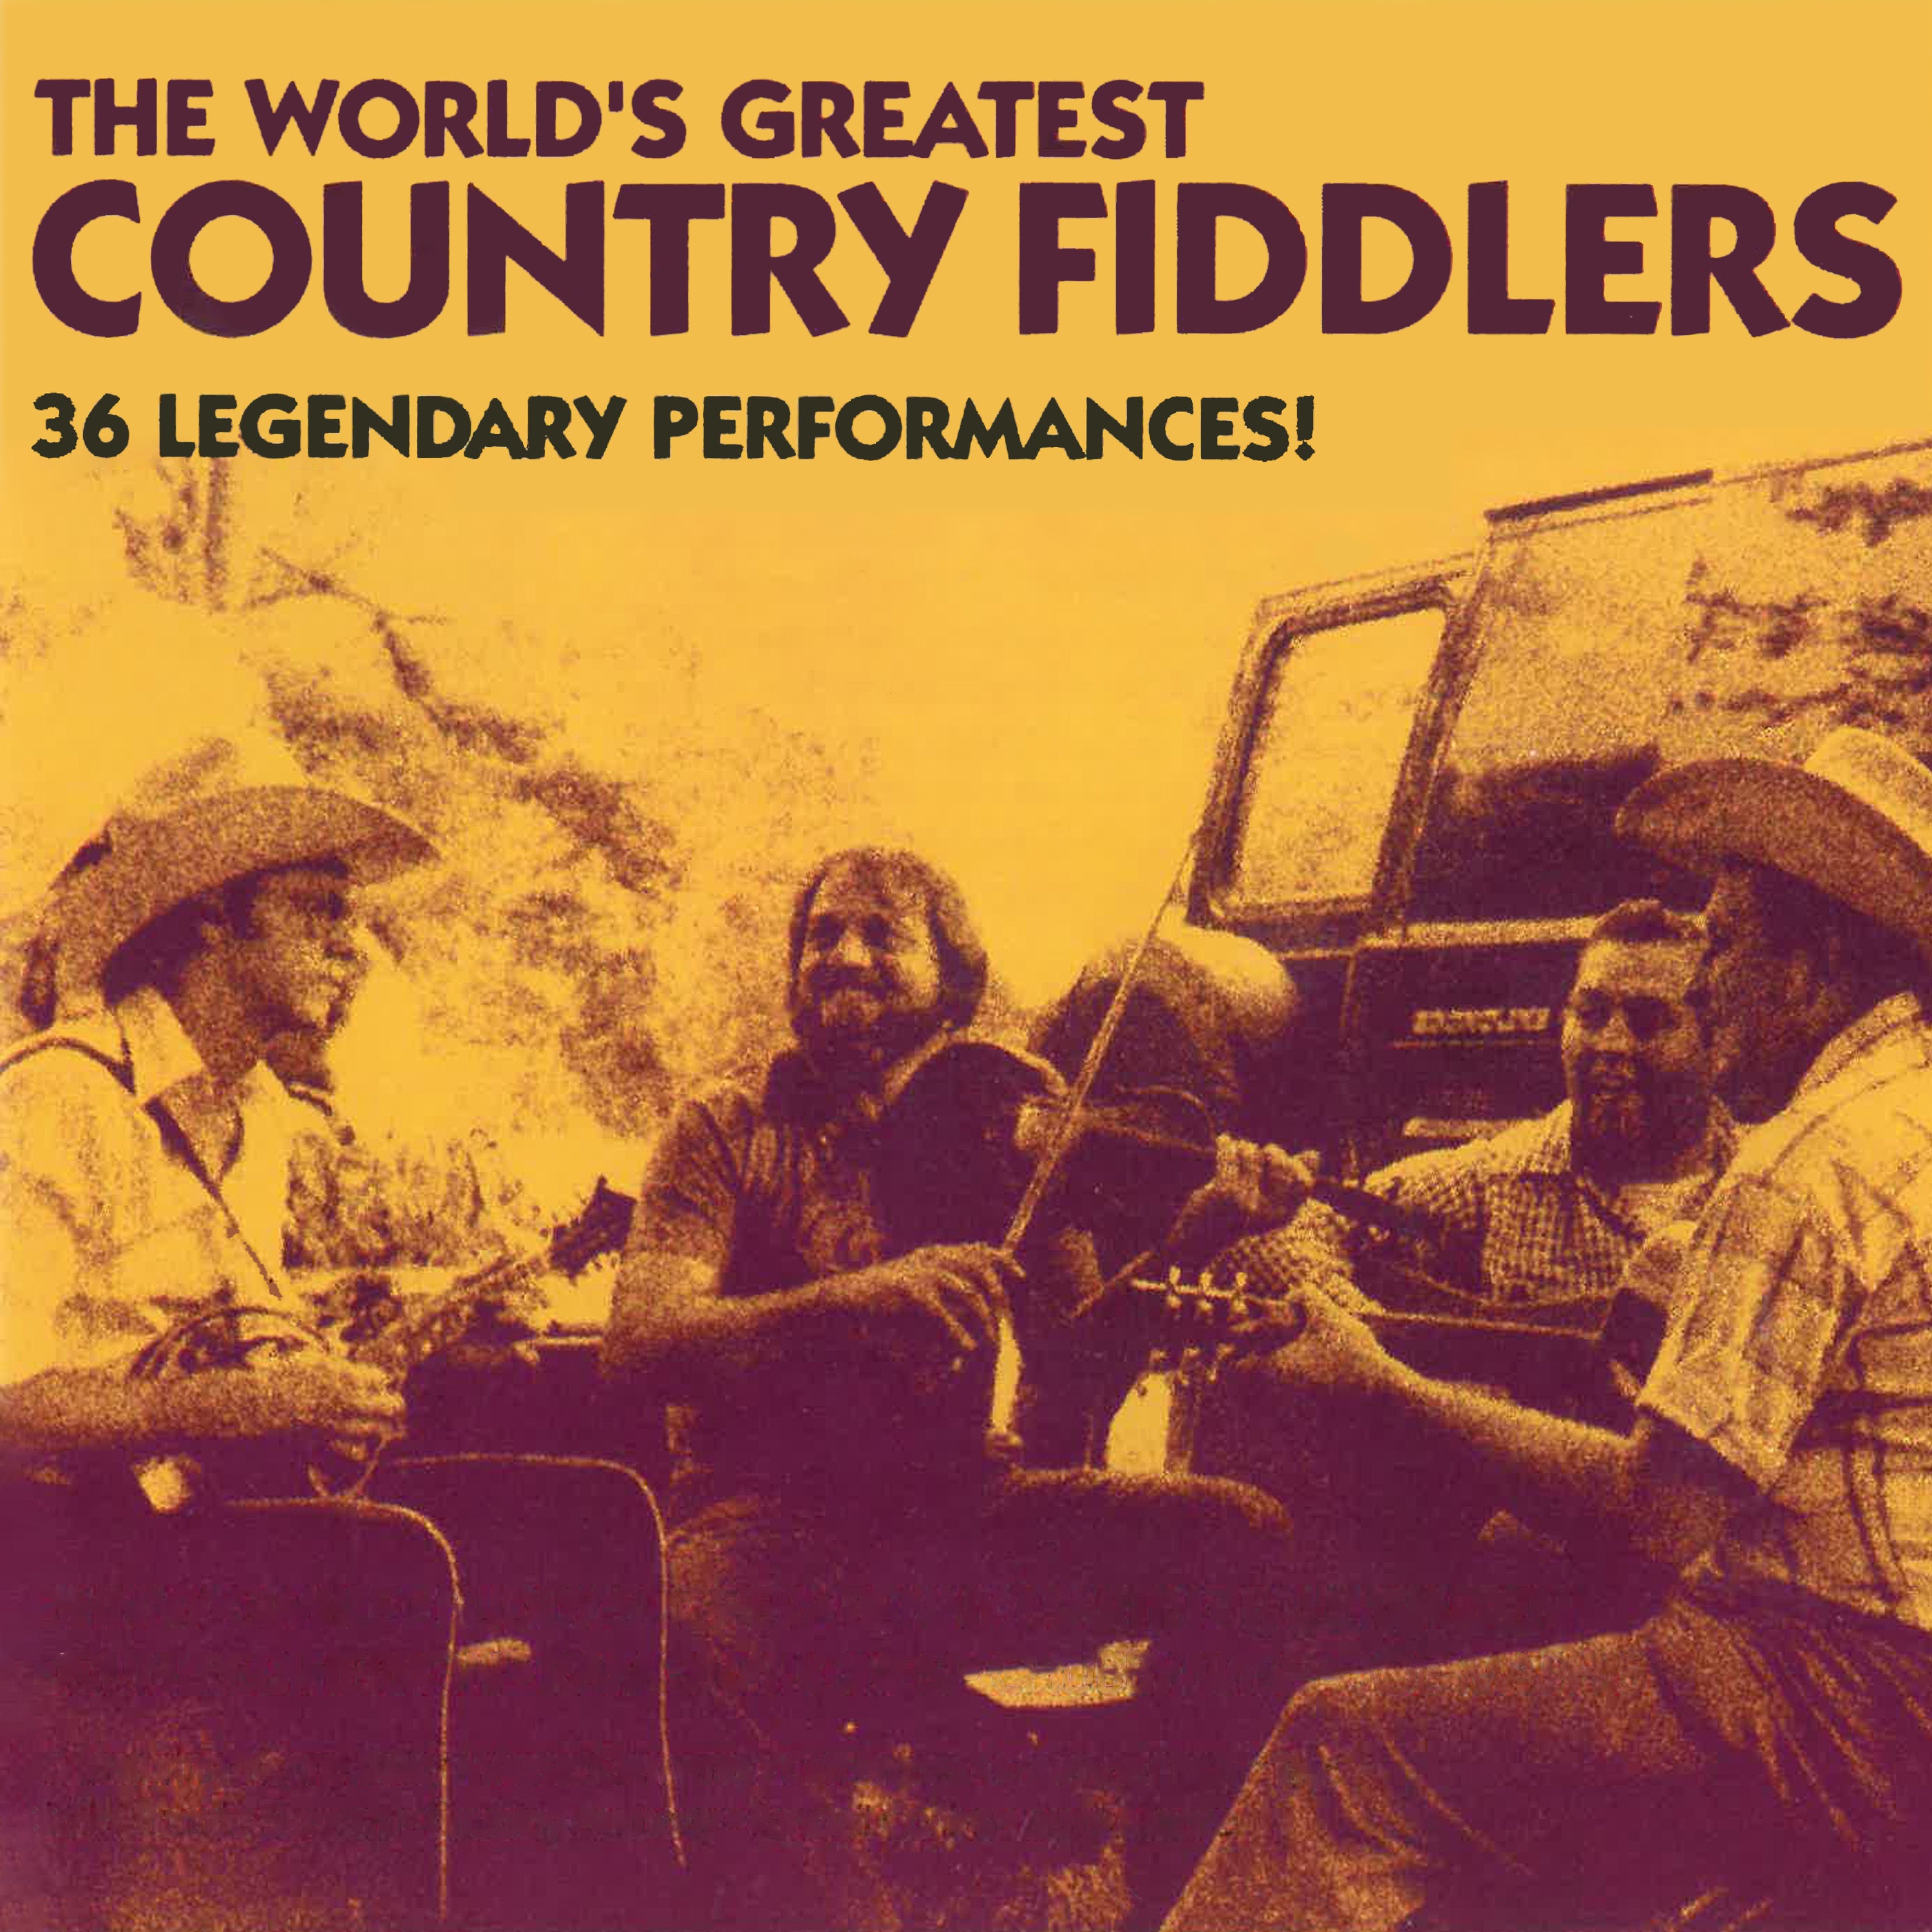 The World's Greatest Country Fiddlers - MP3